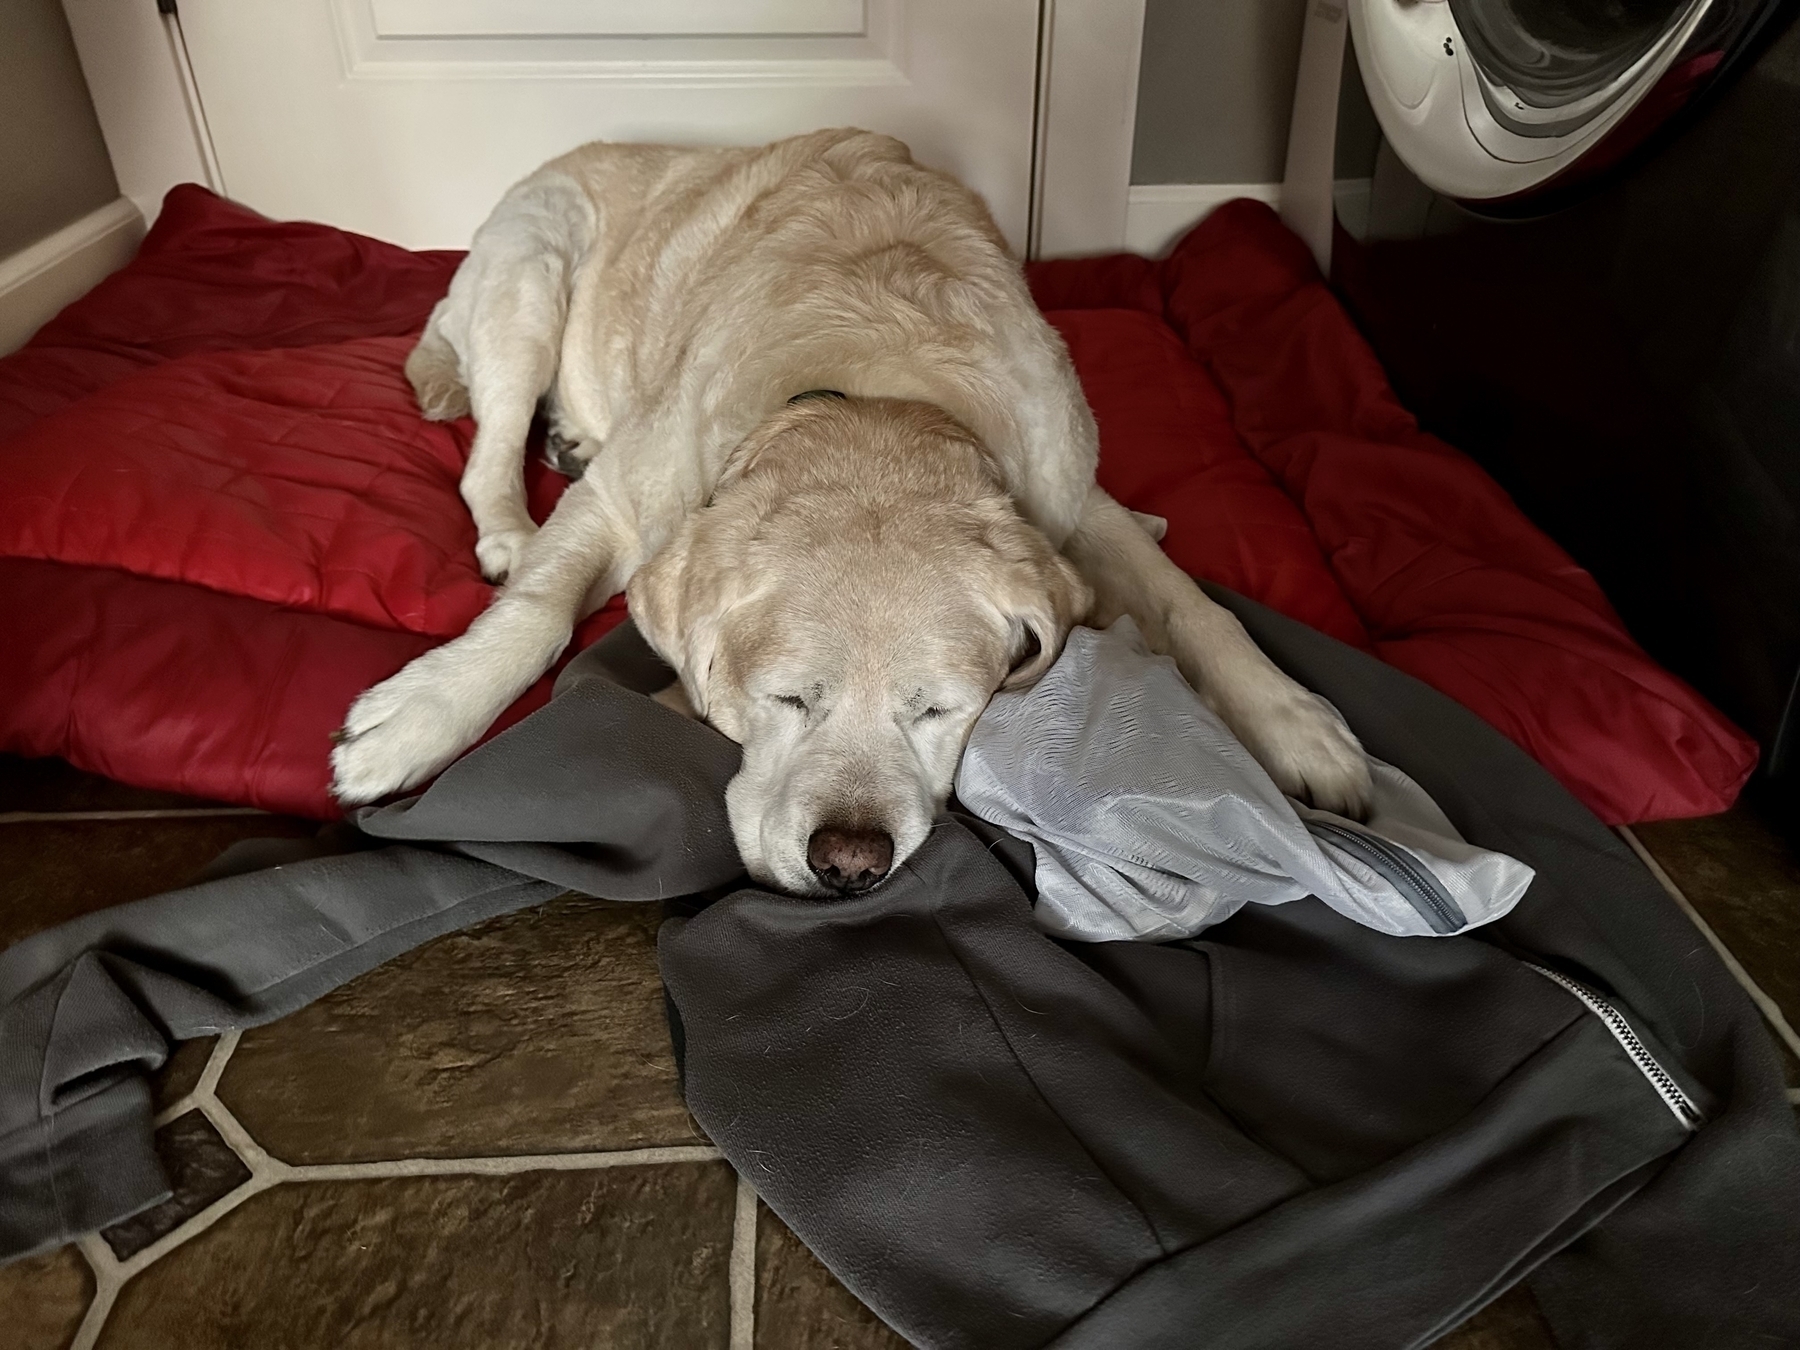 Photo of a dog sound asleep in the laundry room